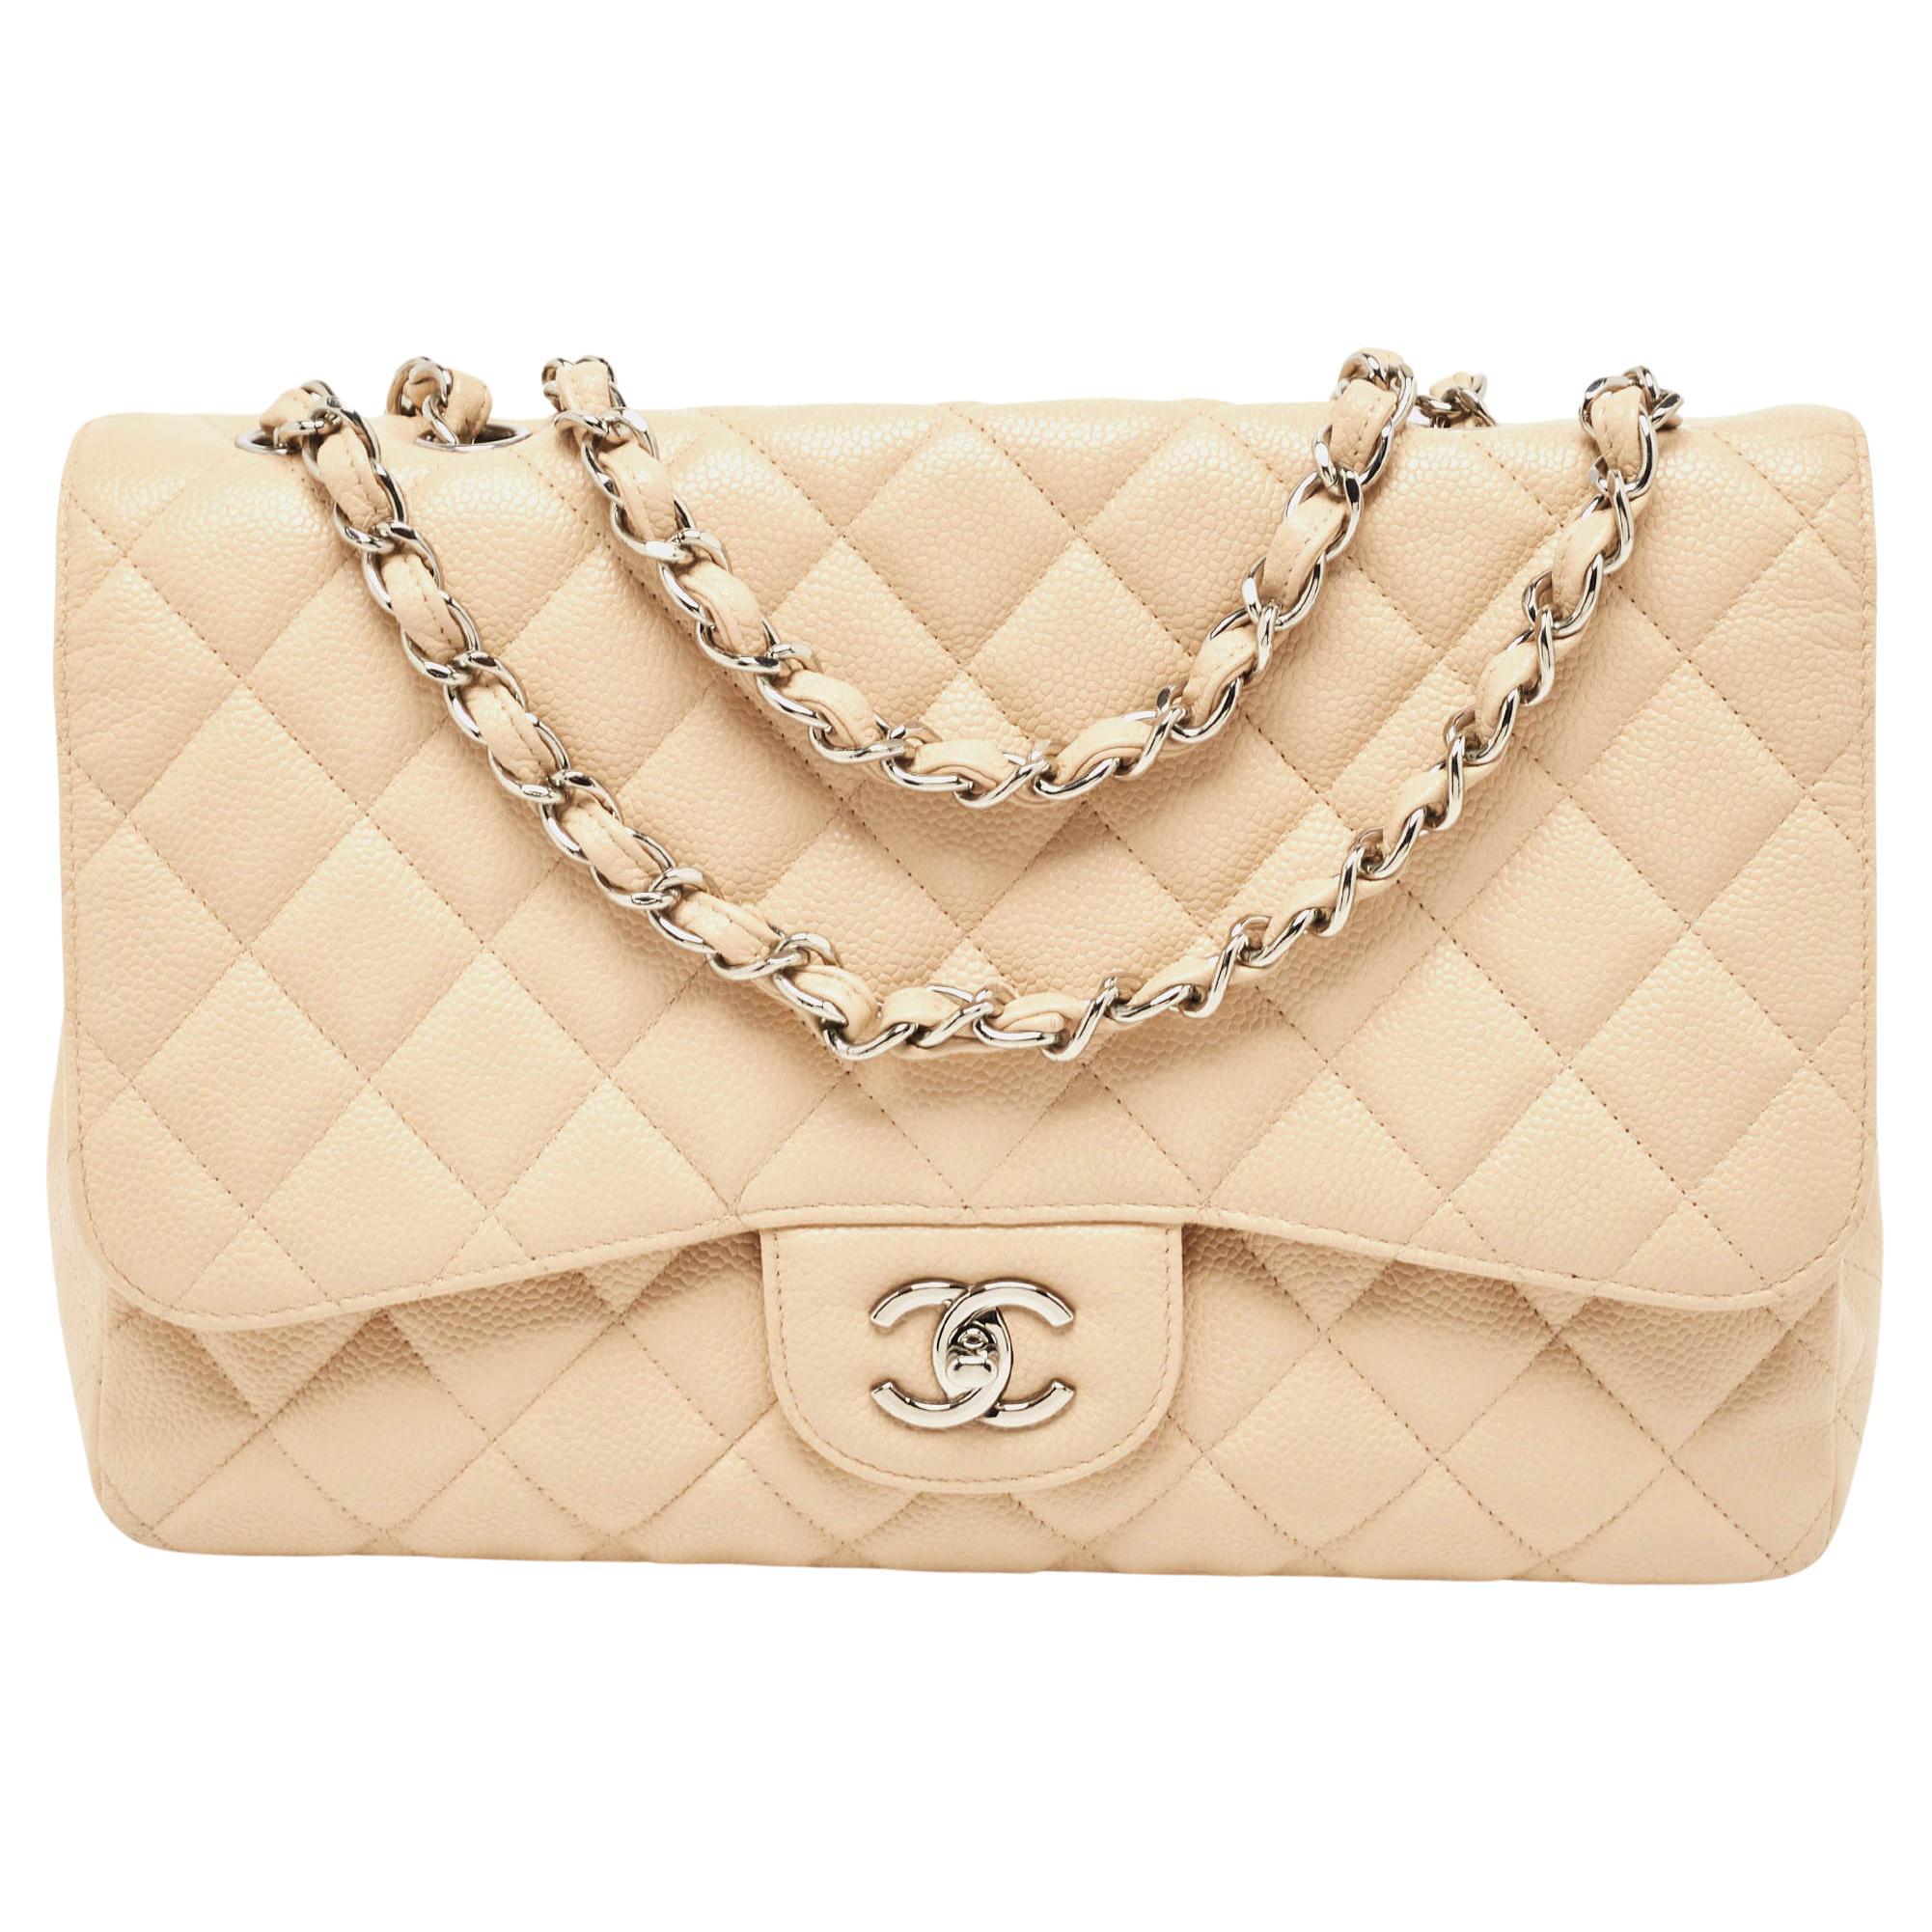 Chanel Beige Quilted Caviar Leather Jumbo Classic Single Flap Bag